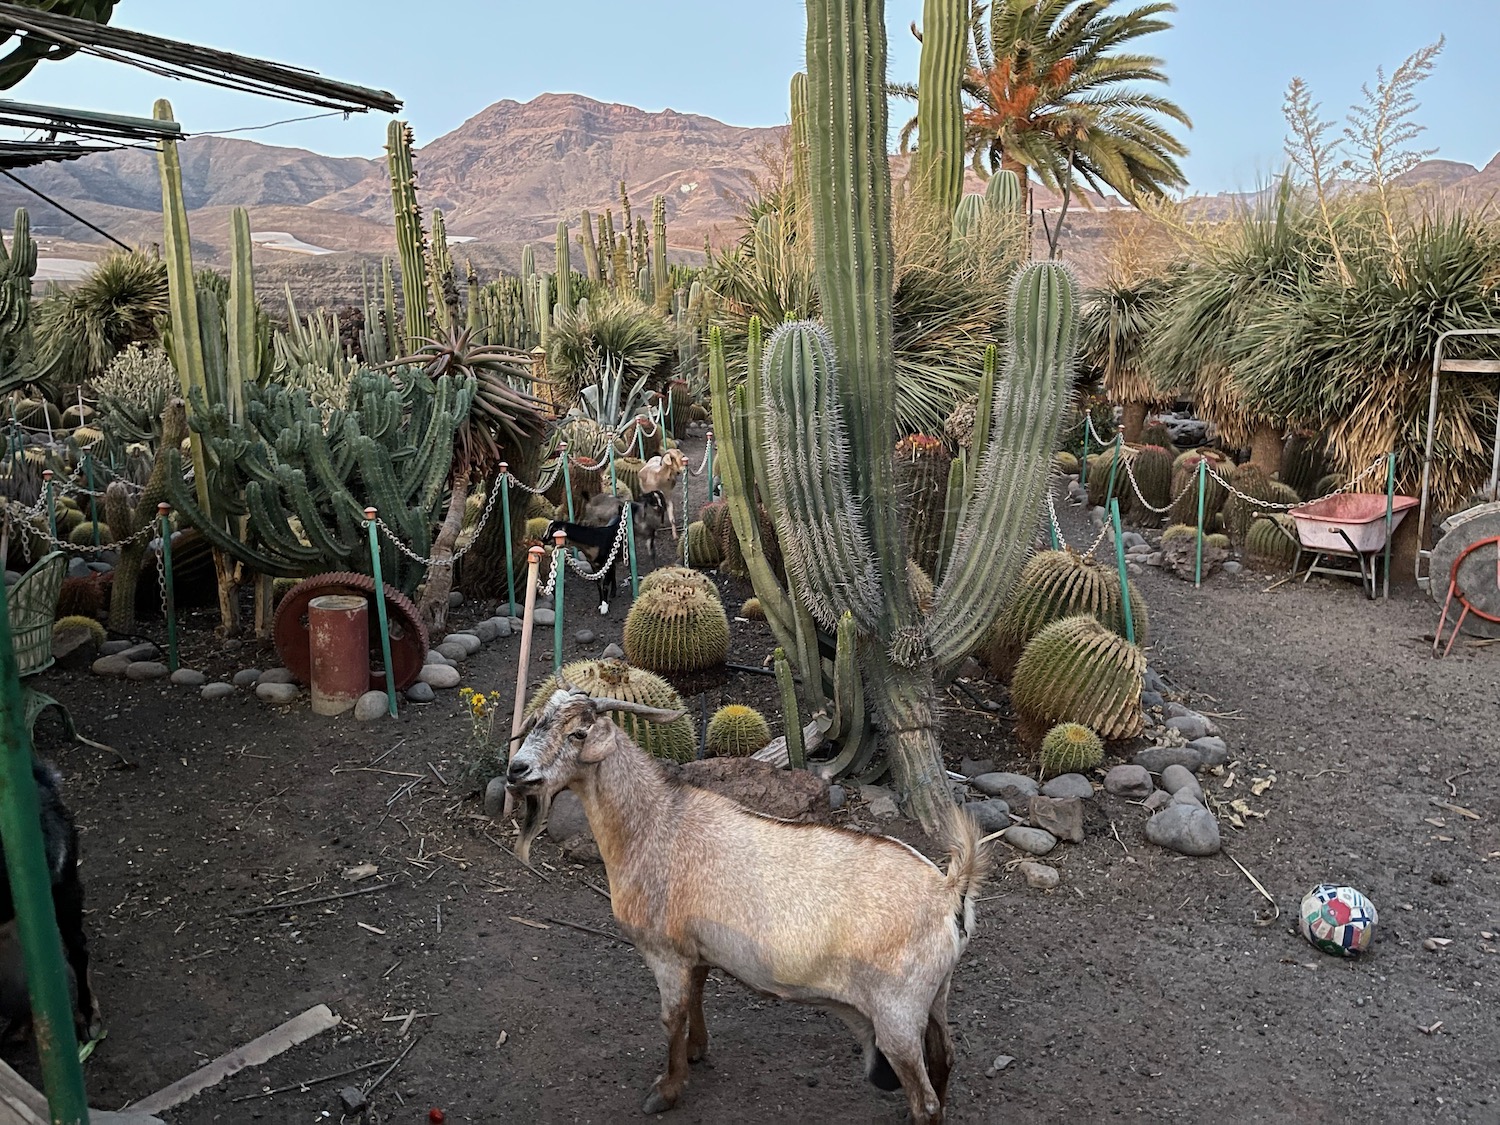 a goat standing in a dirt field with cactus plants